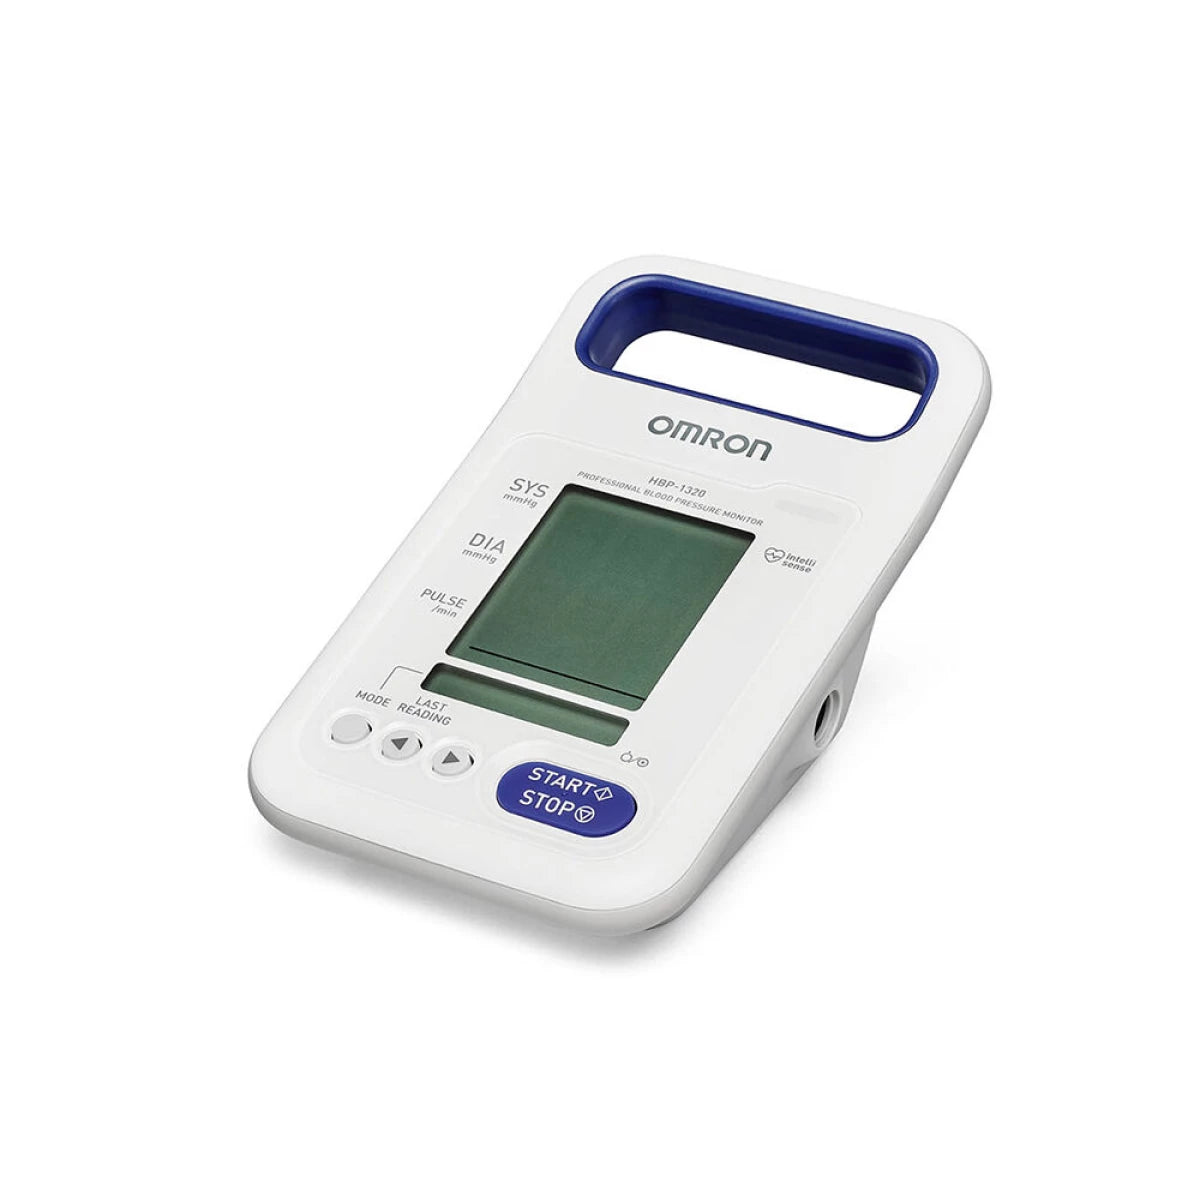 OMRON Blood Pressure Monitor HBP-1320 (HBP-1320-E) Professional Clinical Blood Pressure Monitor